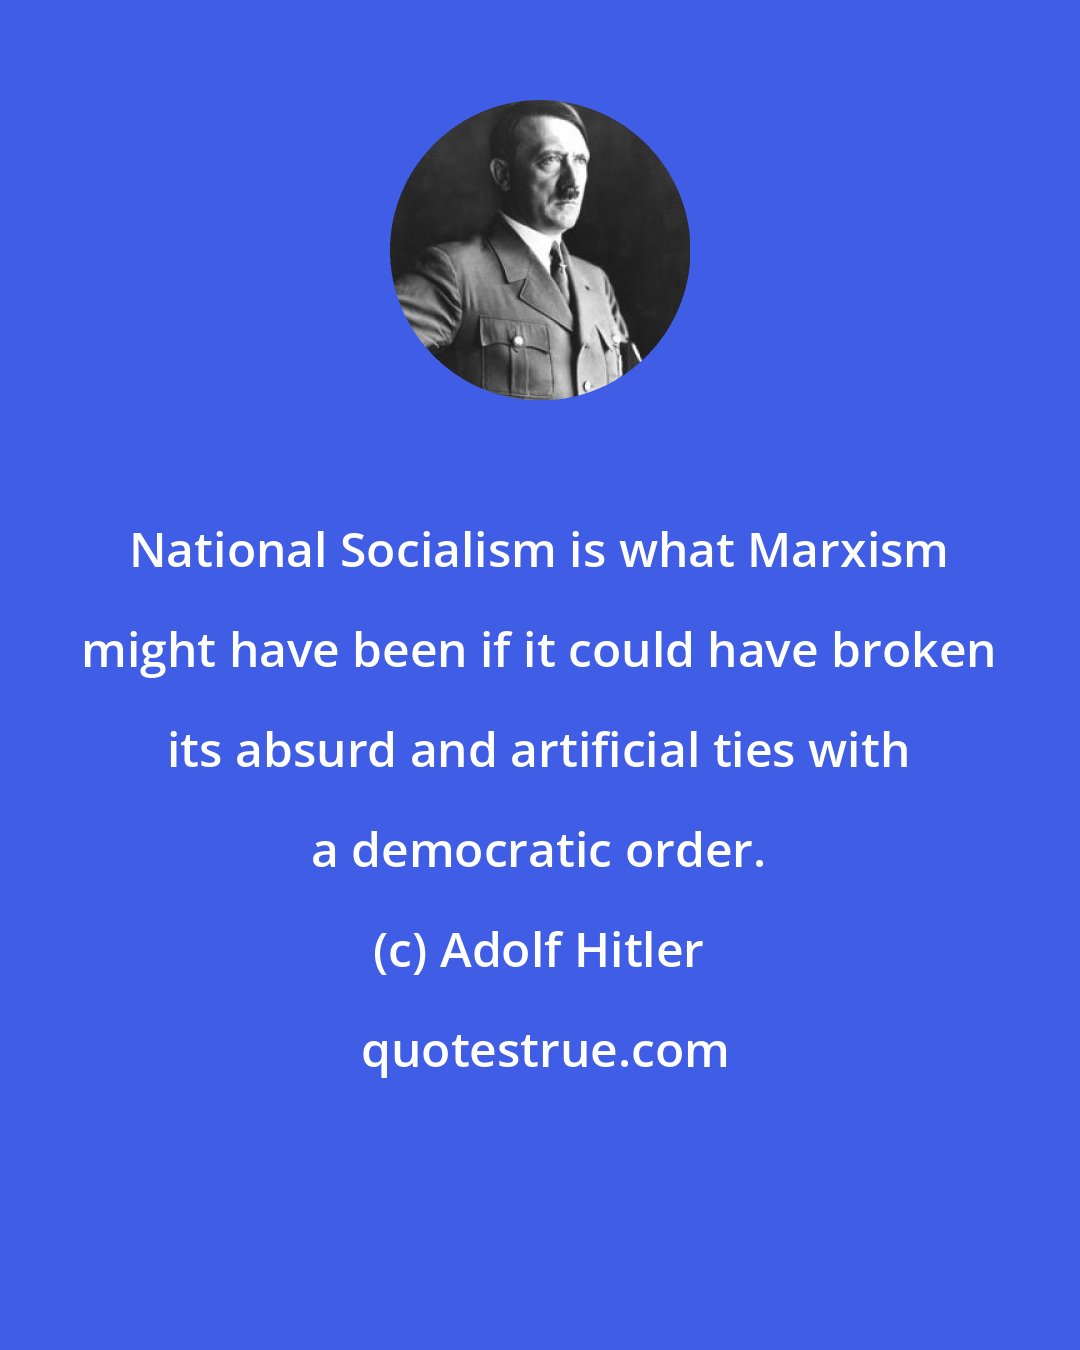 Adolf Hitler: National Socialism is what Marxism might have been if it could have broken its absurd and artificial ties with a democratic order.